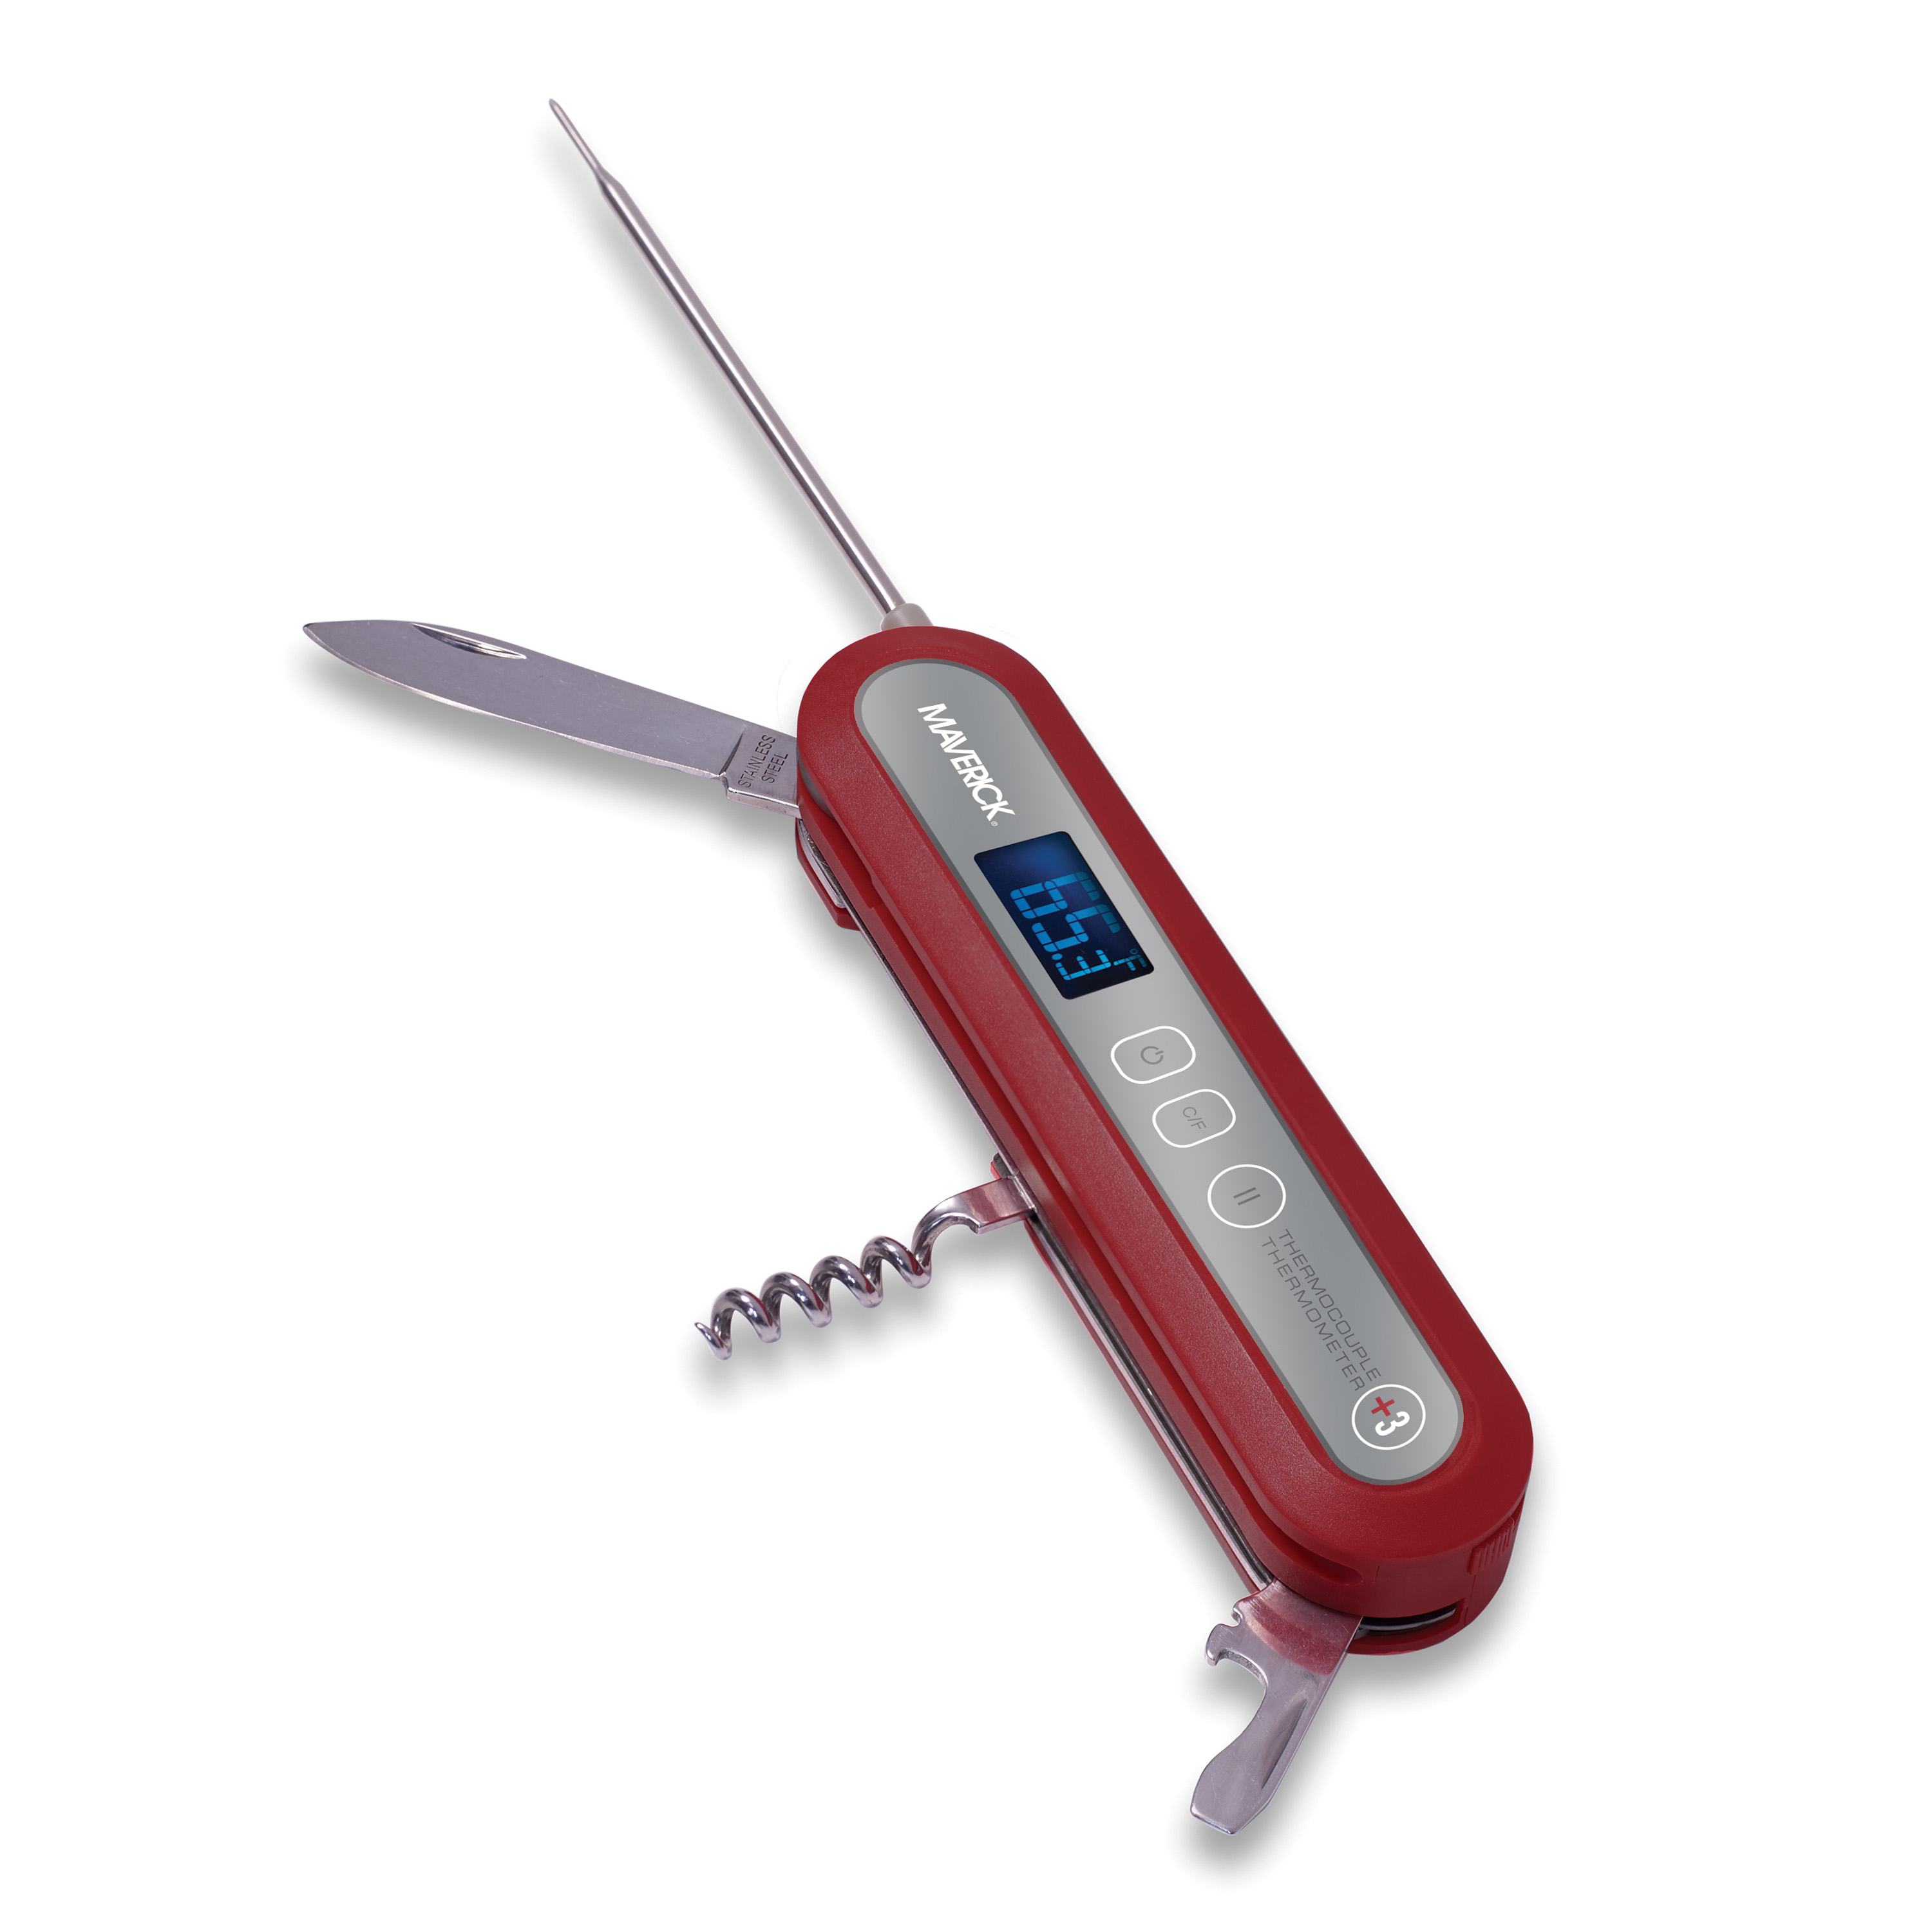 Promotional Analog Meat Thermometer w/Pocket Sleeve and Clip